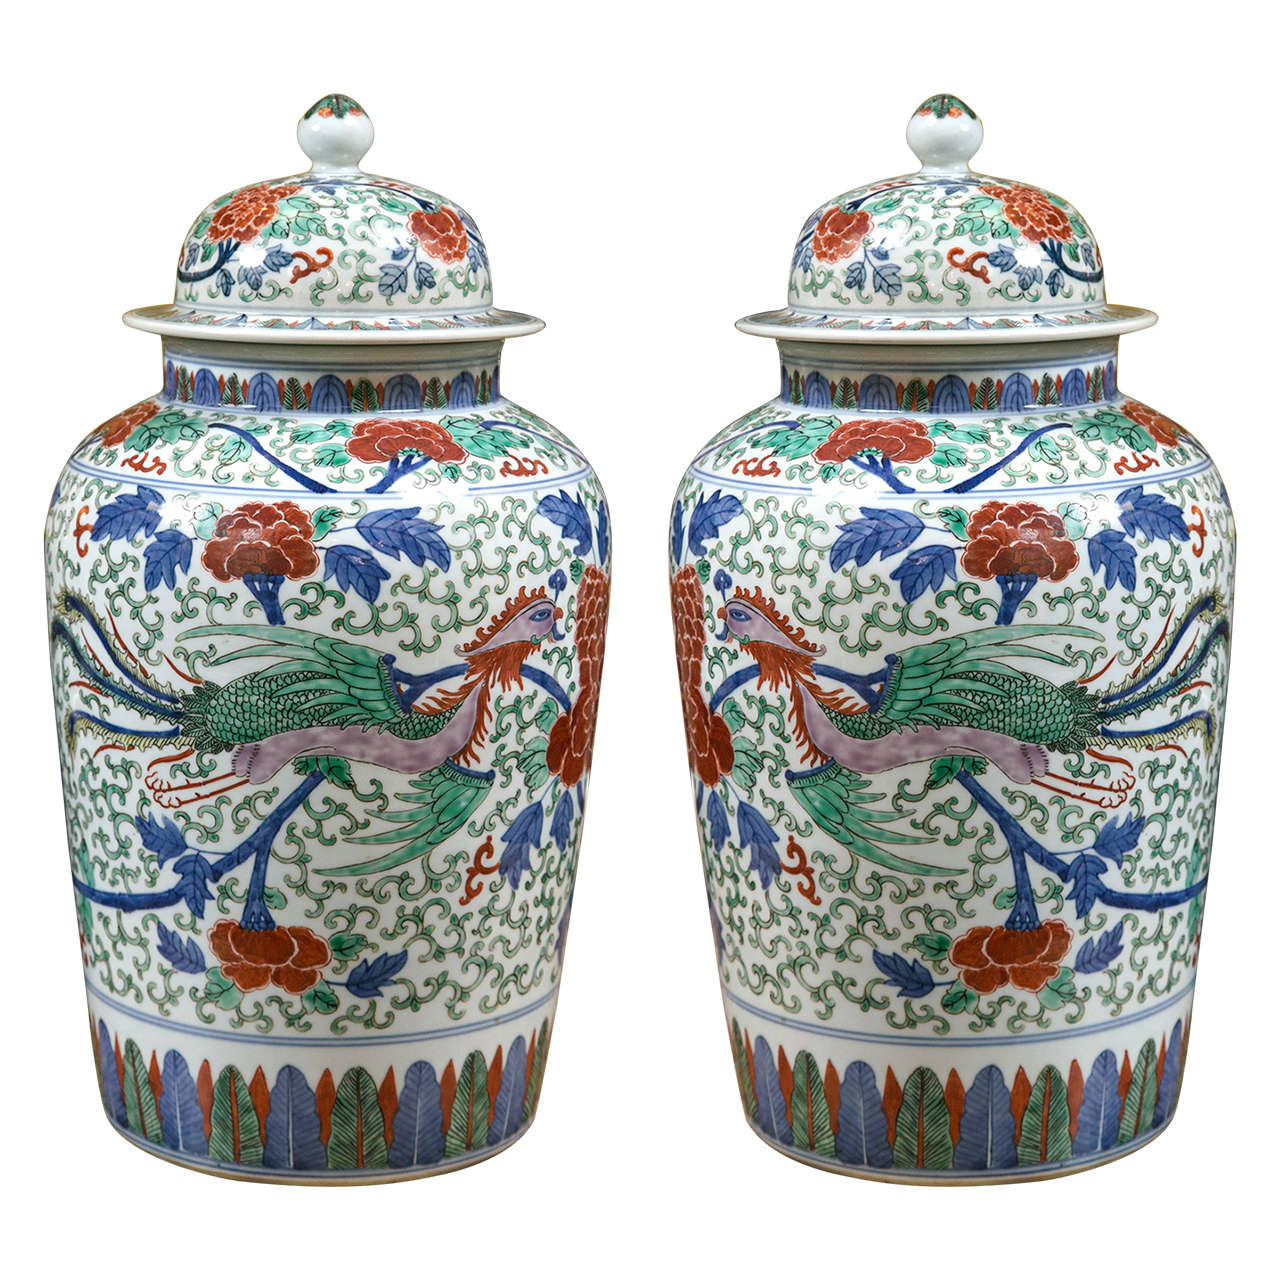 Large Pair of Chinese Porcelain Covered Jars